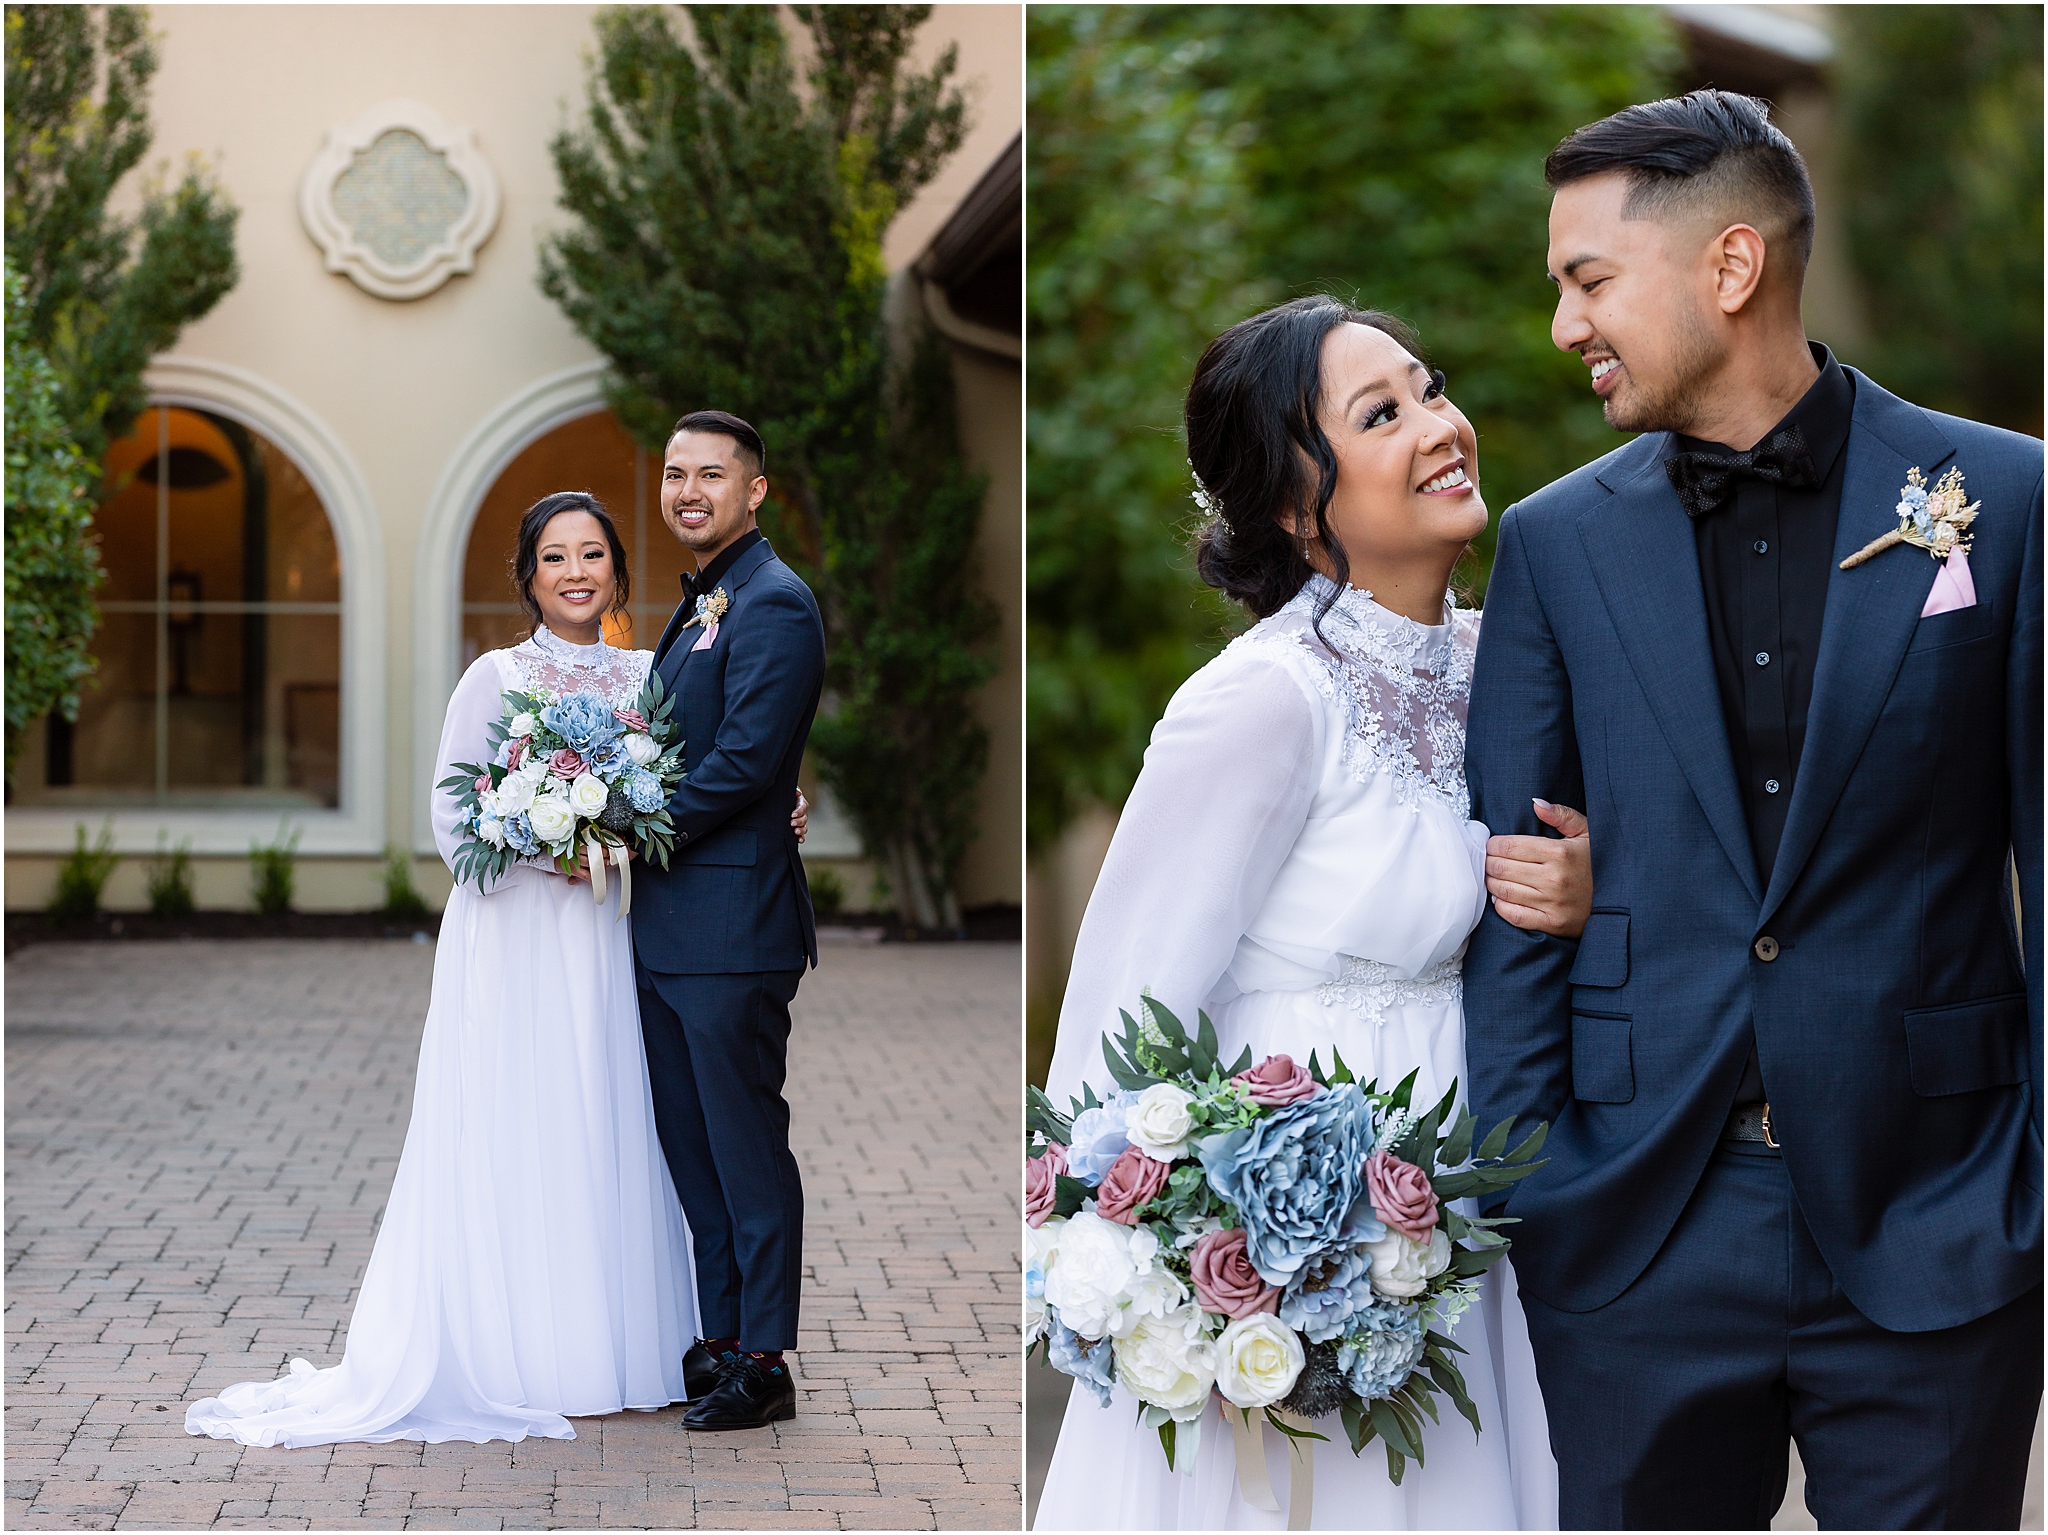 Dallas wedding photographers capture bride and groom together outside of their chapel wedding venue in Dallas holding onto each other and smiling